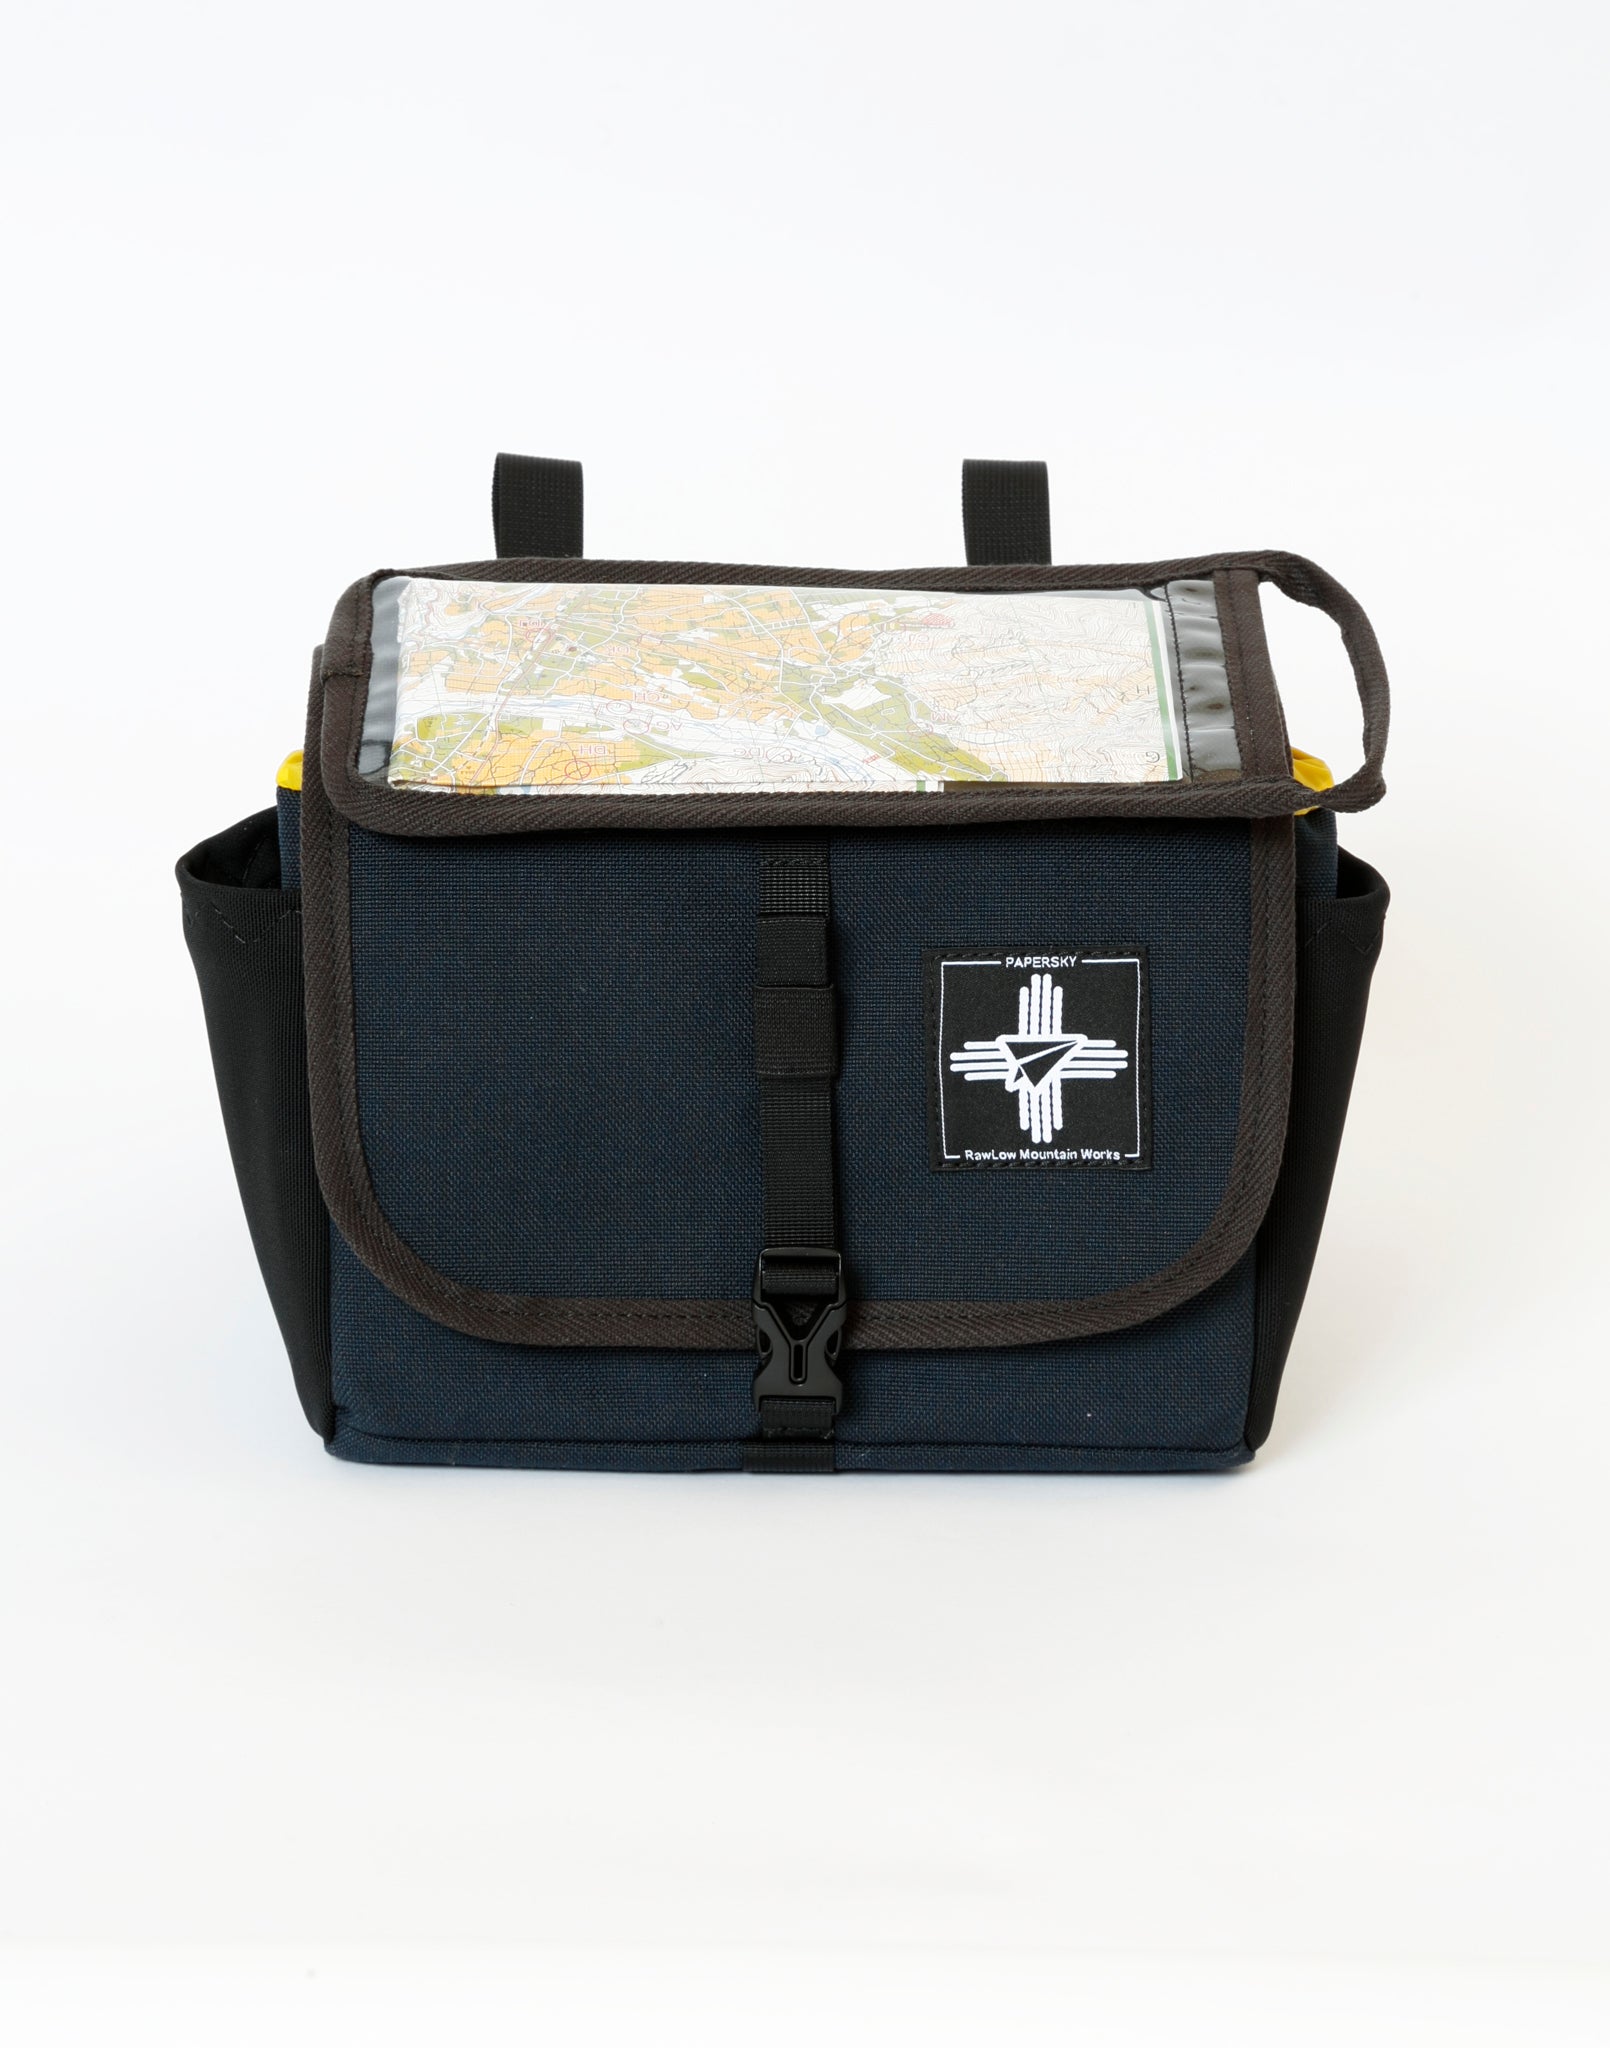 papersky and rawlow mountain products front bike bag